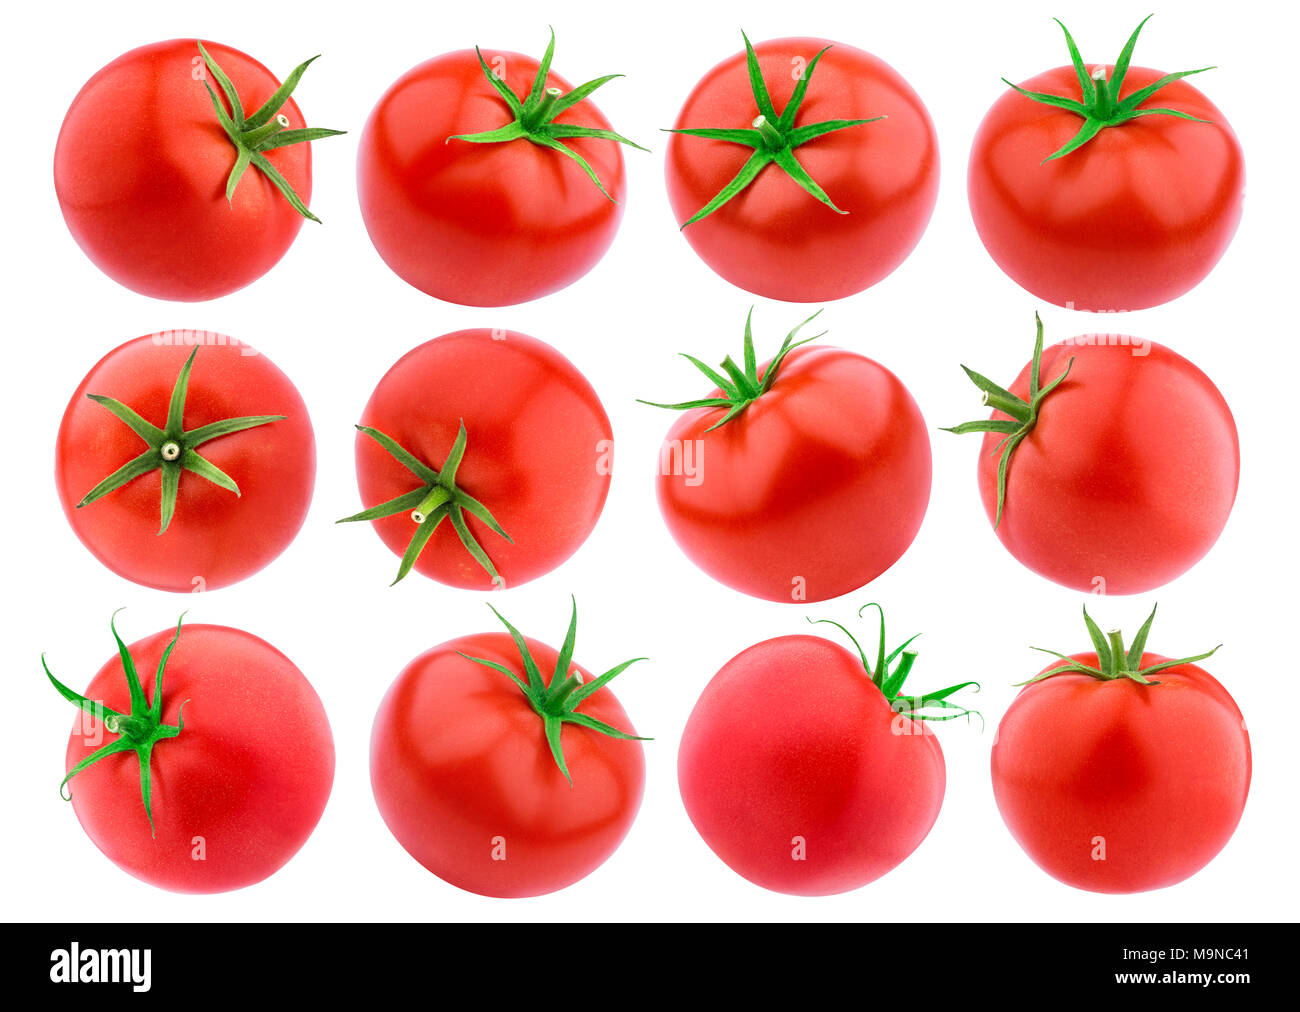 Isolated tomato. Whole tomatoes on white background. Collection Stock Photo